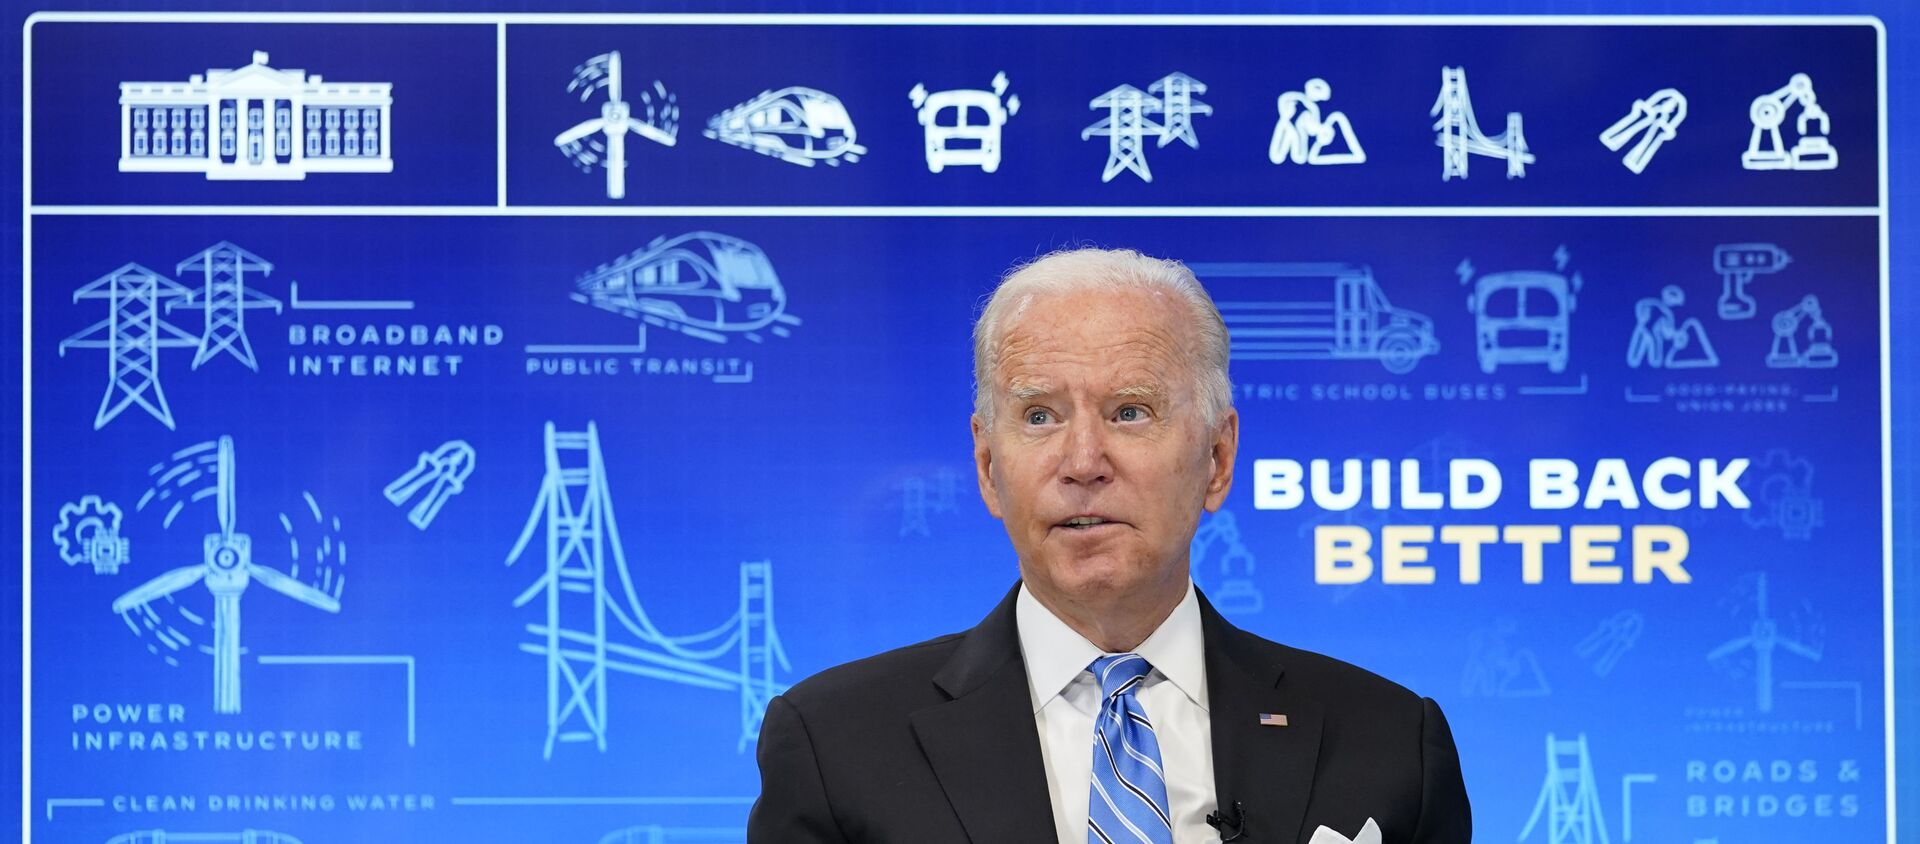 President Joe Biden speaks during a virtual meeting from the South Court Auditorium at the White House complex in Washington, Wednesday, Aug. 11, 2021, to discuss the importance of the bipartisan Infrastructure Investment and Jobs Act. - Sputnik International, 1920, 12.08.2021